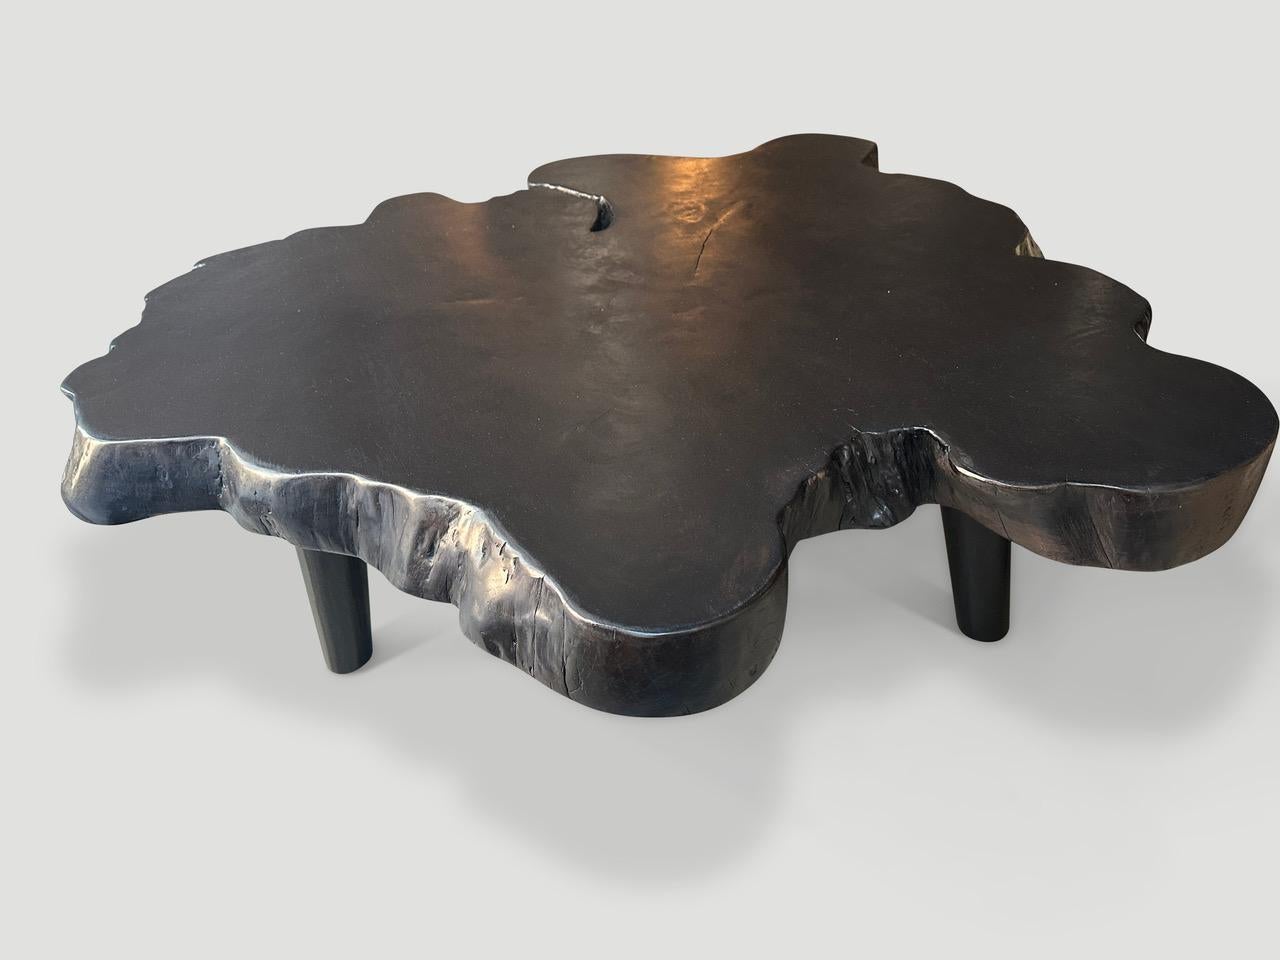 Impressive 3.5” thick teak coffee table floating on mid century style legs. A blend of organic and mid century.

The Triple Burnt Collection represents a unique line of modern furniture and art objects hand made from solid organic wood. Burnt three